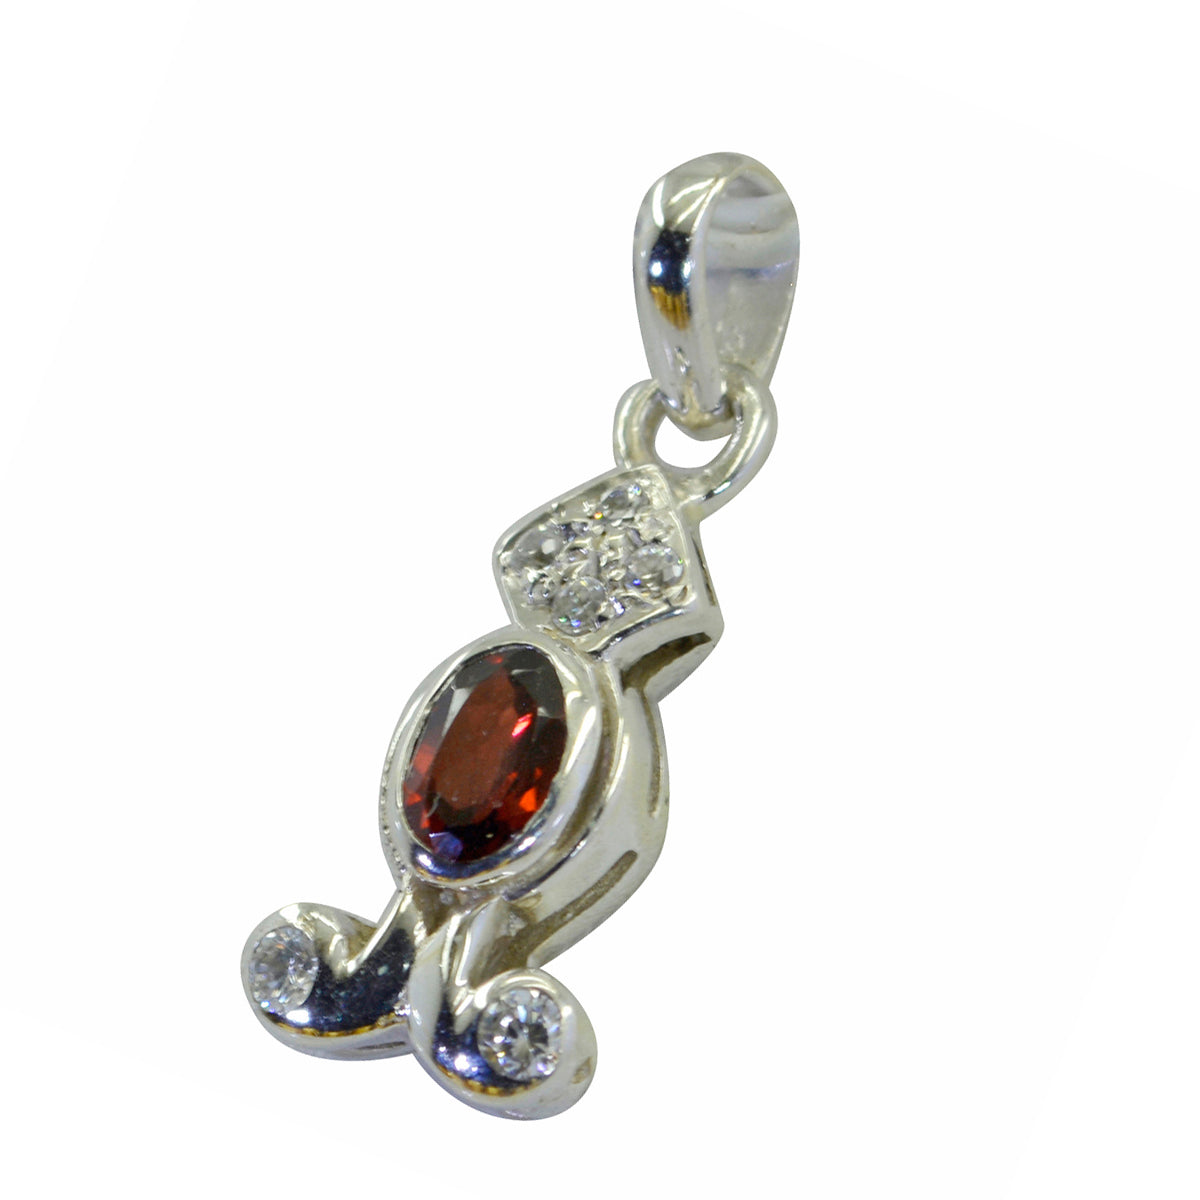 Riyo Irresistible Gemstone Oval Faceted Red Garnet 1130 Sterling Silver Pendant Gift For Good Friday